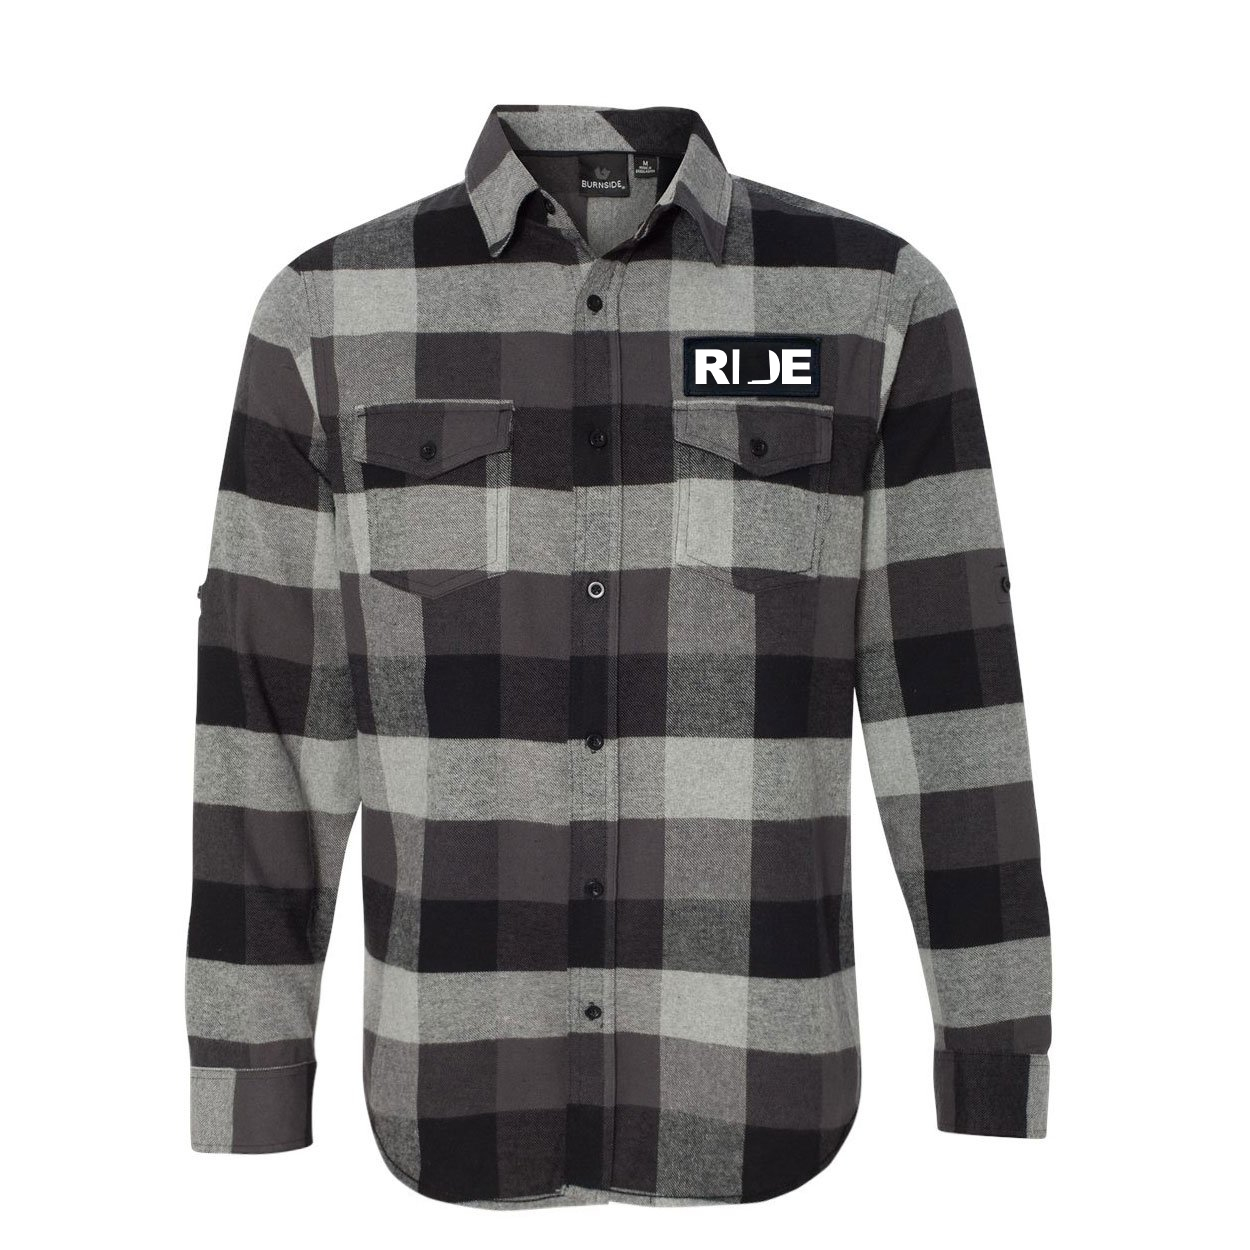 Ride New Mexico Classic Unisex Long Sleeve Woven Patch Flannel Shirt Black/Gray (White Logo)